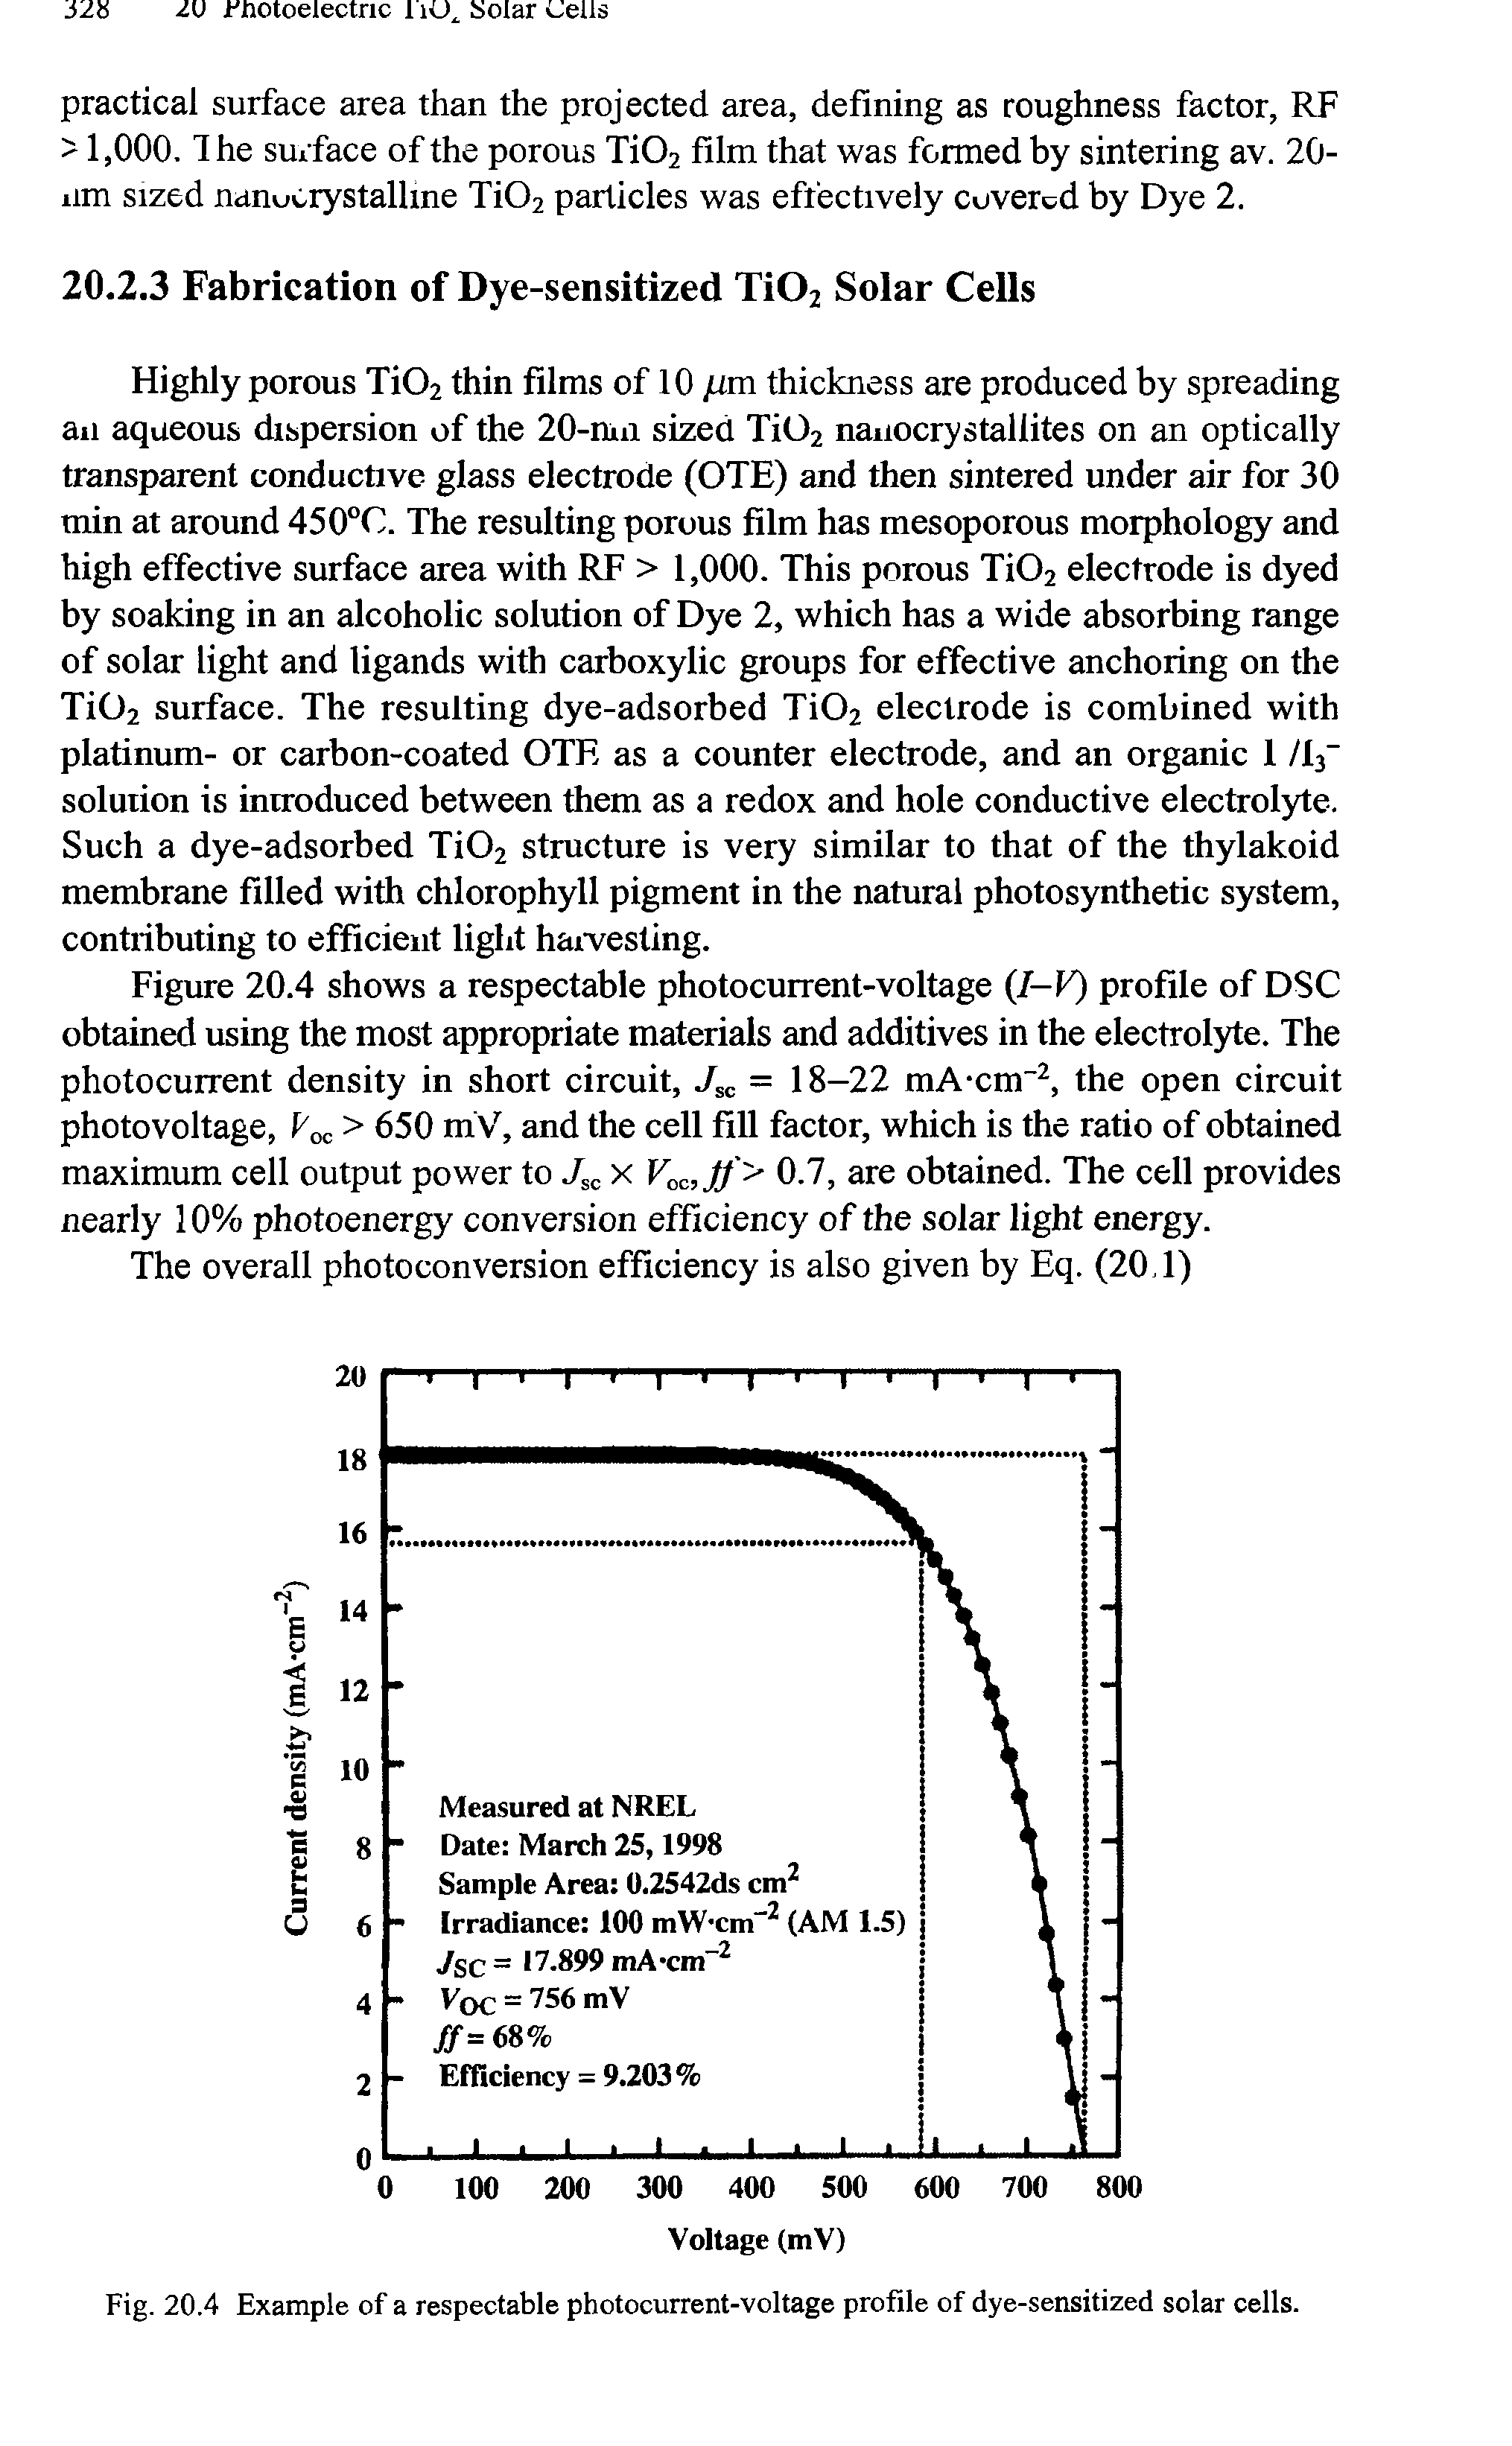 Fig. 20.4 Example of a respectable photocurrent-voltage profile of dye-sensitized solar cells.